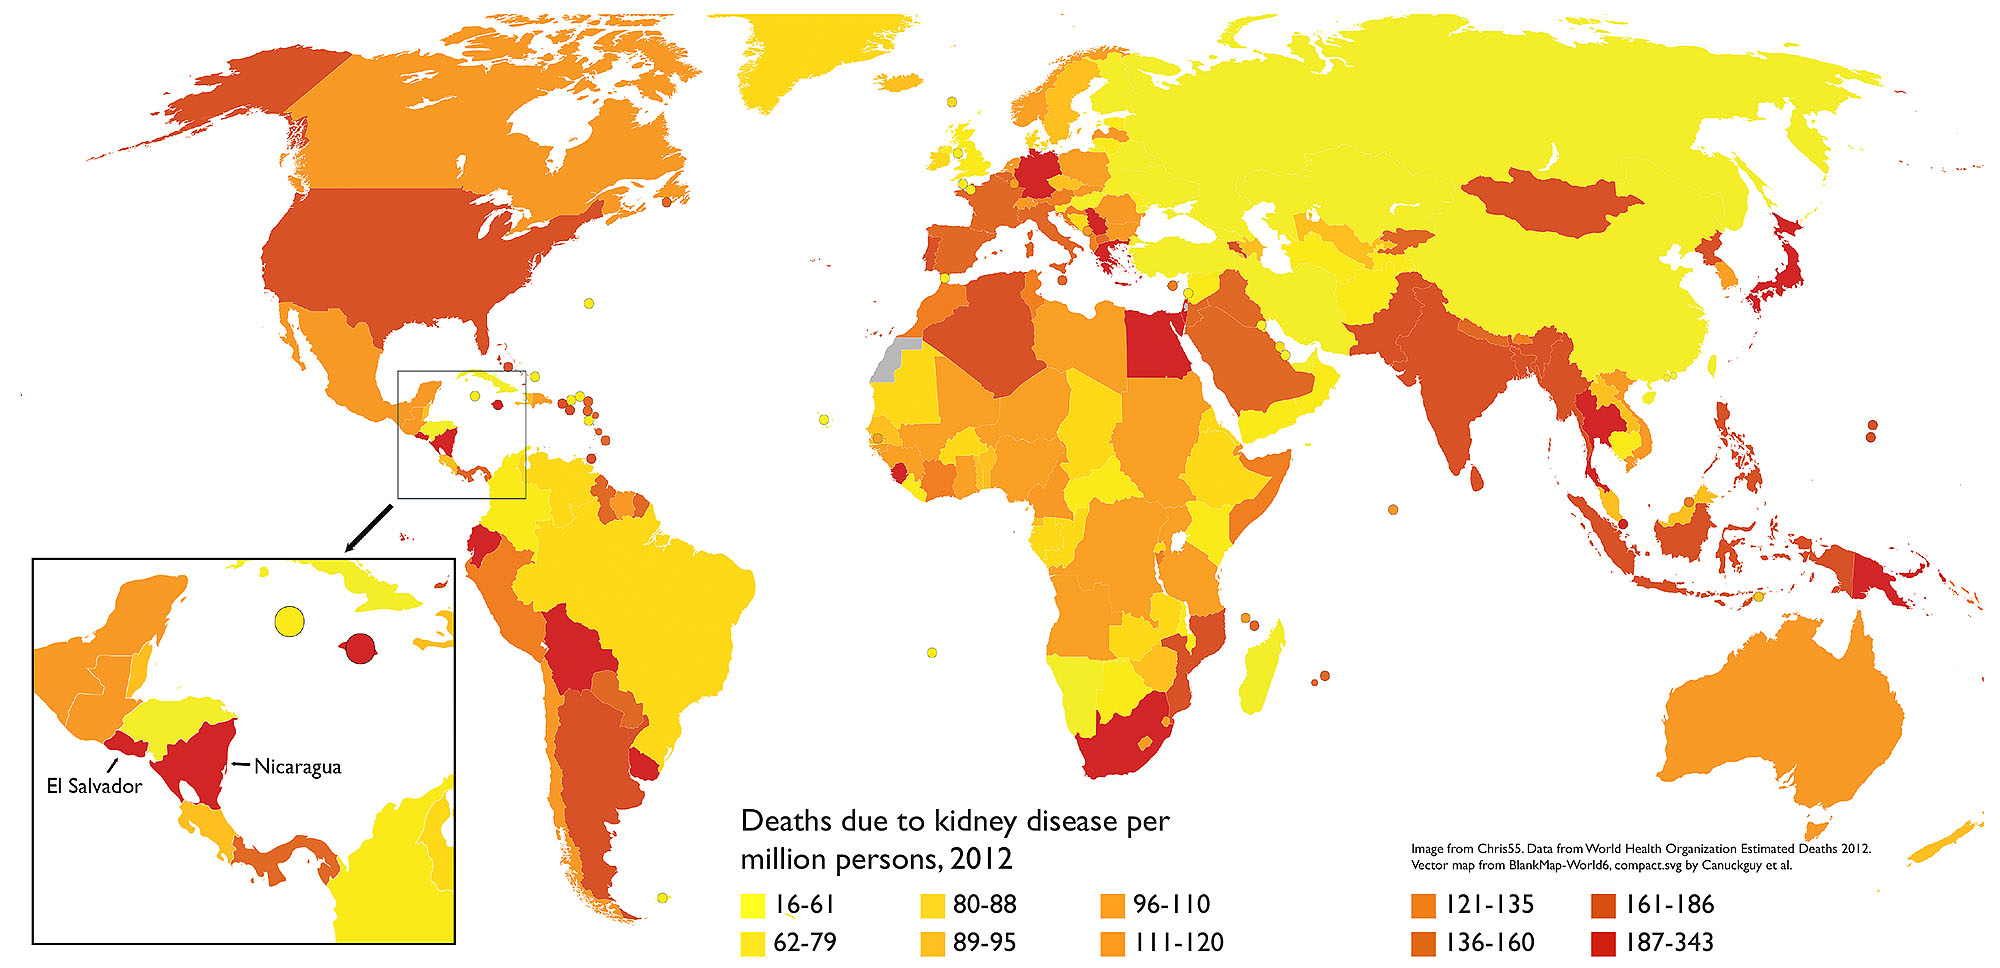 A map showing kidney disease prevalence in the world in 2012; El Salvador and Nicaragua (have among the world’s highest rates of death from kidney disease. (Image from Chris55. Data from World Health Organization Estimated Deaths 2012.)